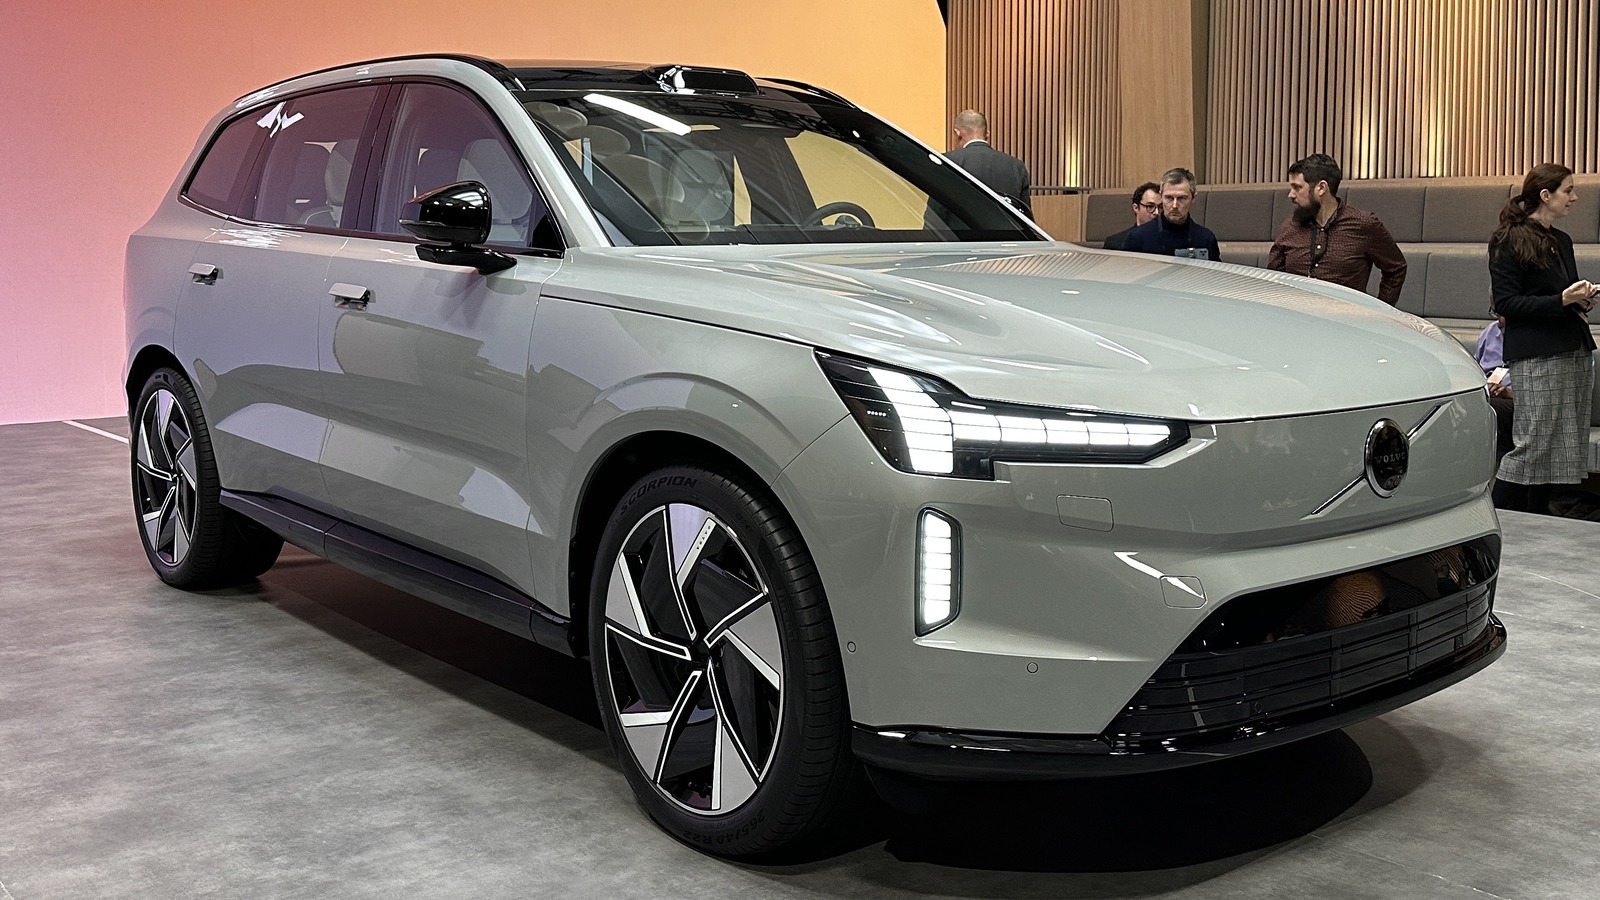 volvo-s-ex90-electric-suv-could-charm-its-way-to-the-top-first-look-slashgear